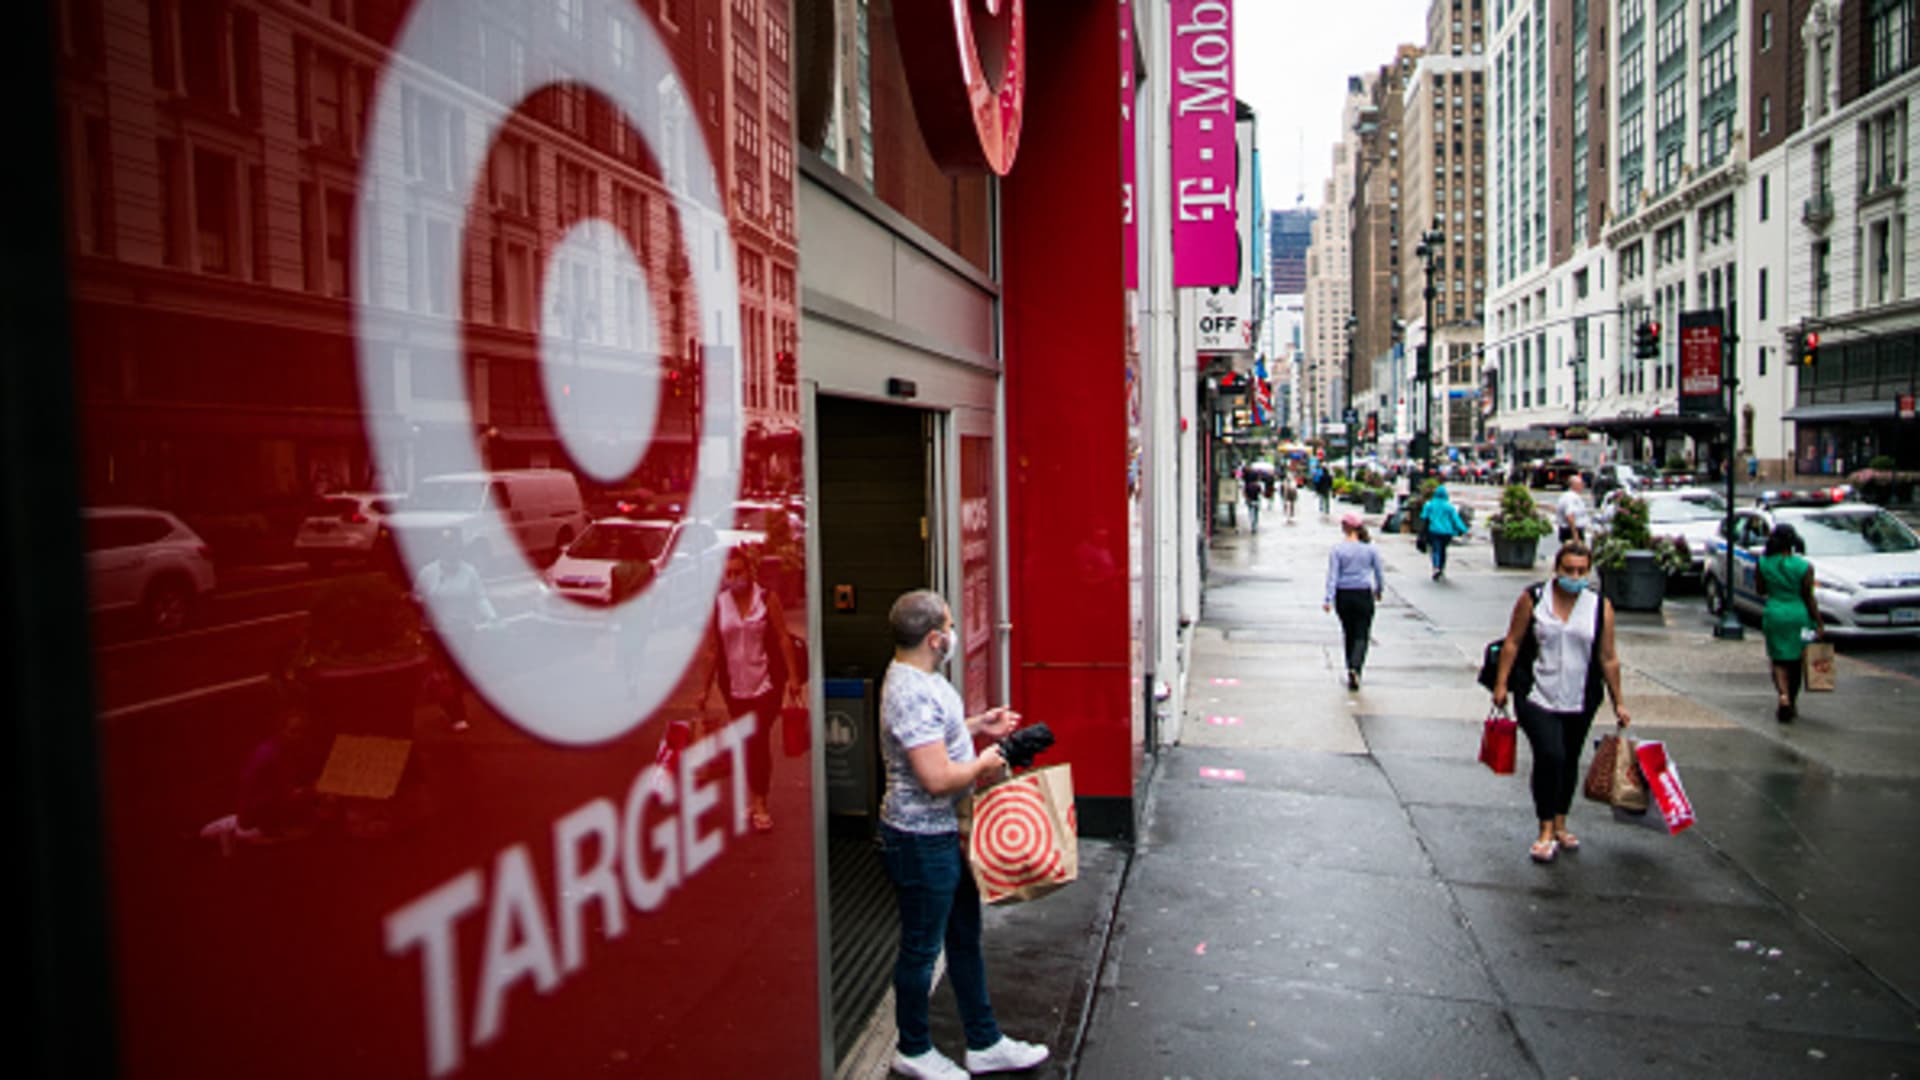 People exit Target store in Midtown Manhattan on August 19, 2020 in New York. Target reports earns second quarter, attracting millions of new customers online, setting a record for sales that drove profits up by 80.3% to $1.7 billion.